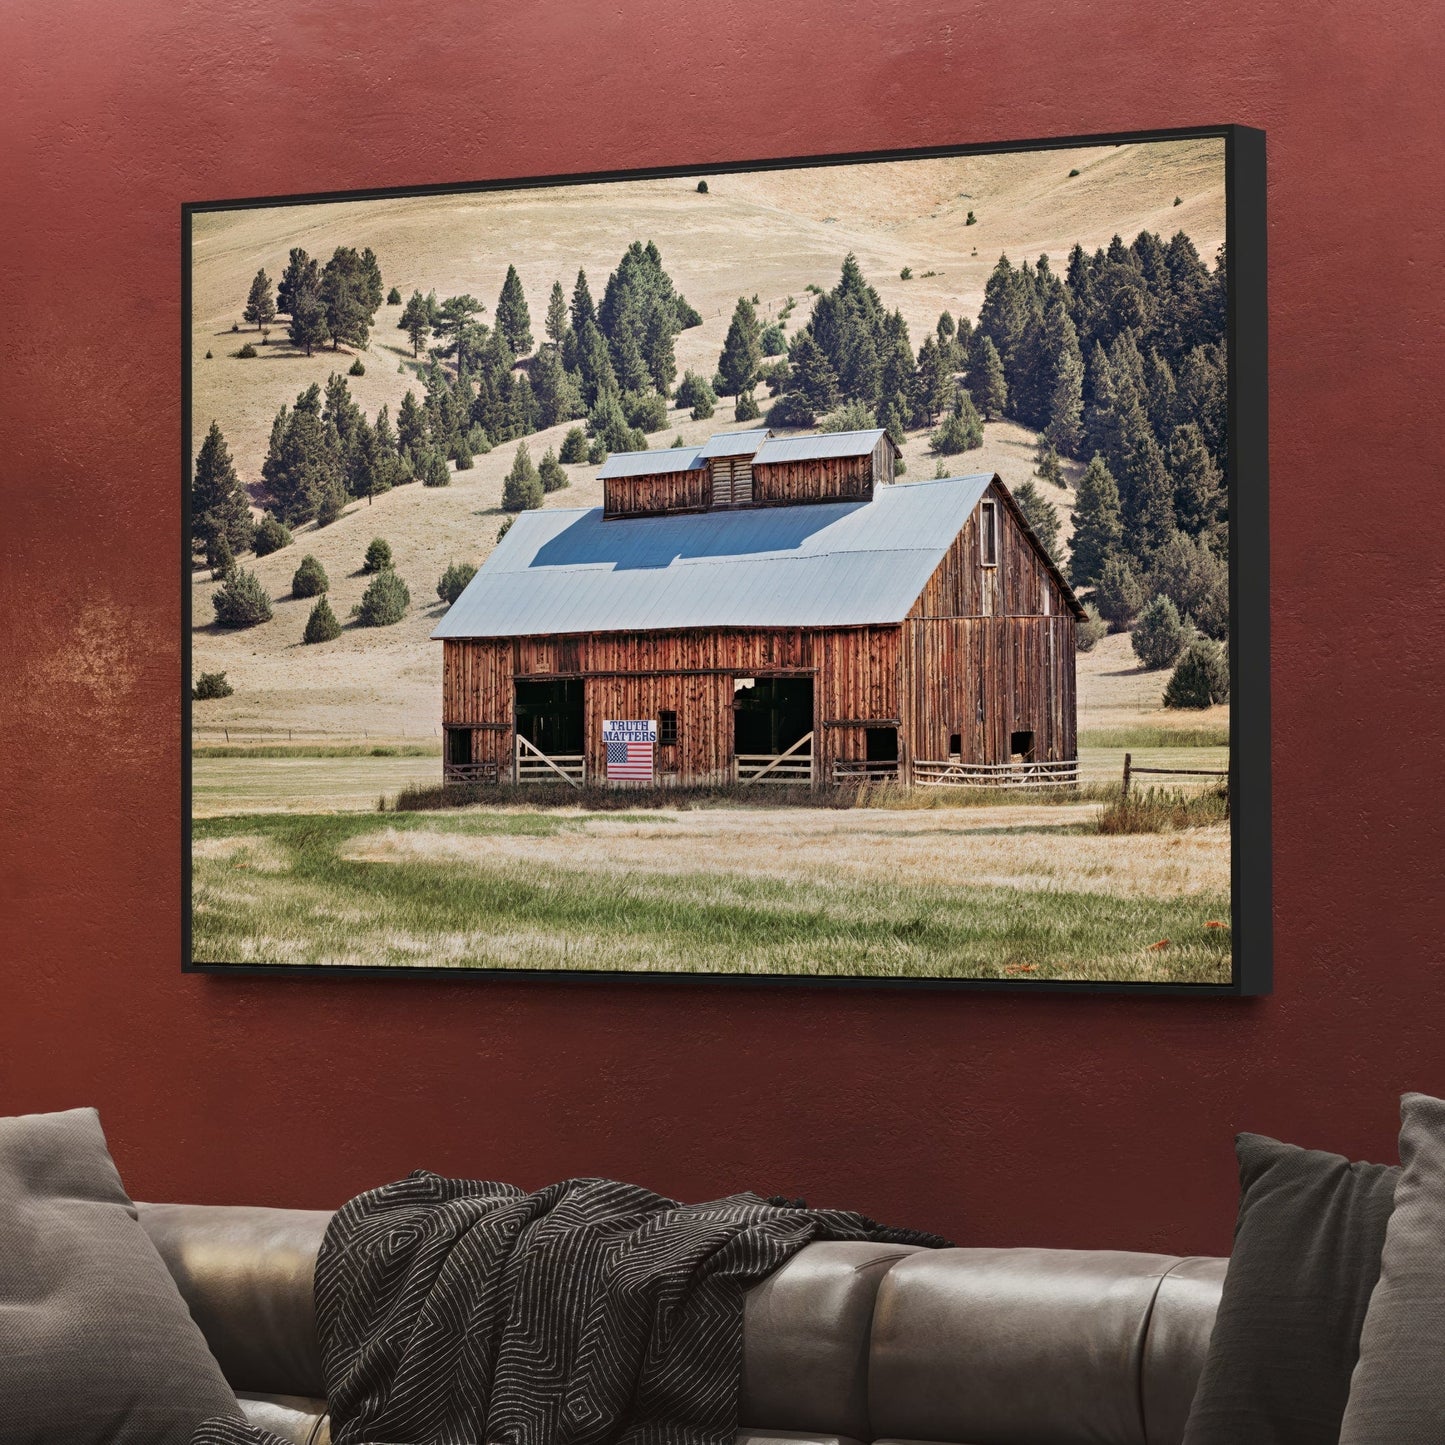 Old Barn and American Flag - Truth Matters Inspirational Wall Art Teri James Photography